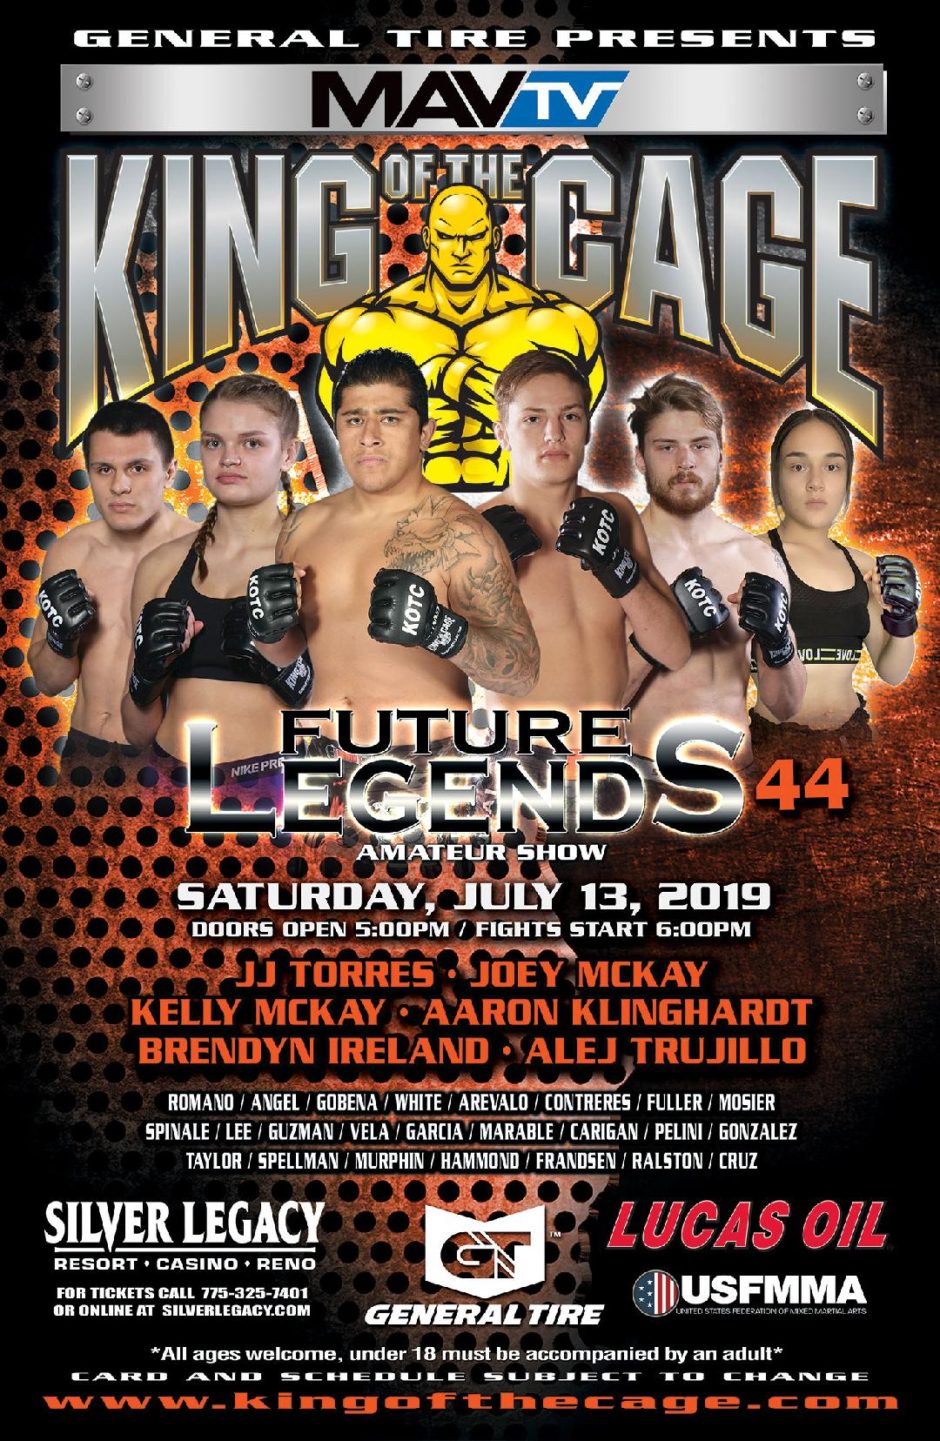 King of the Cage Returns to Silver Legacy Resort Casino Reno on July 13